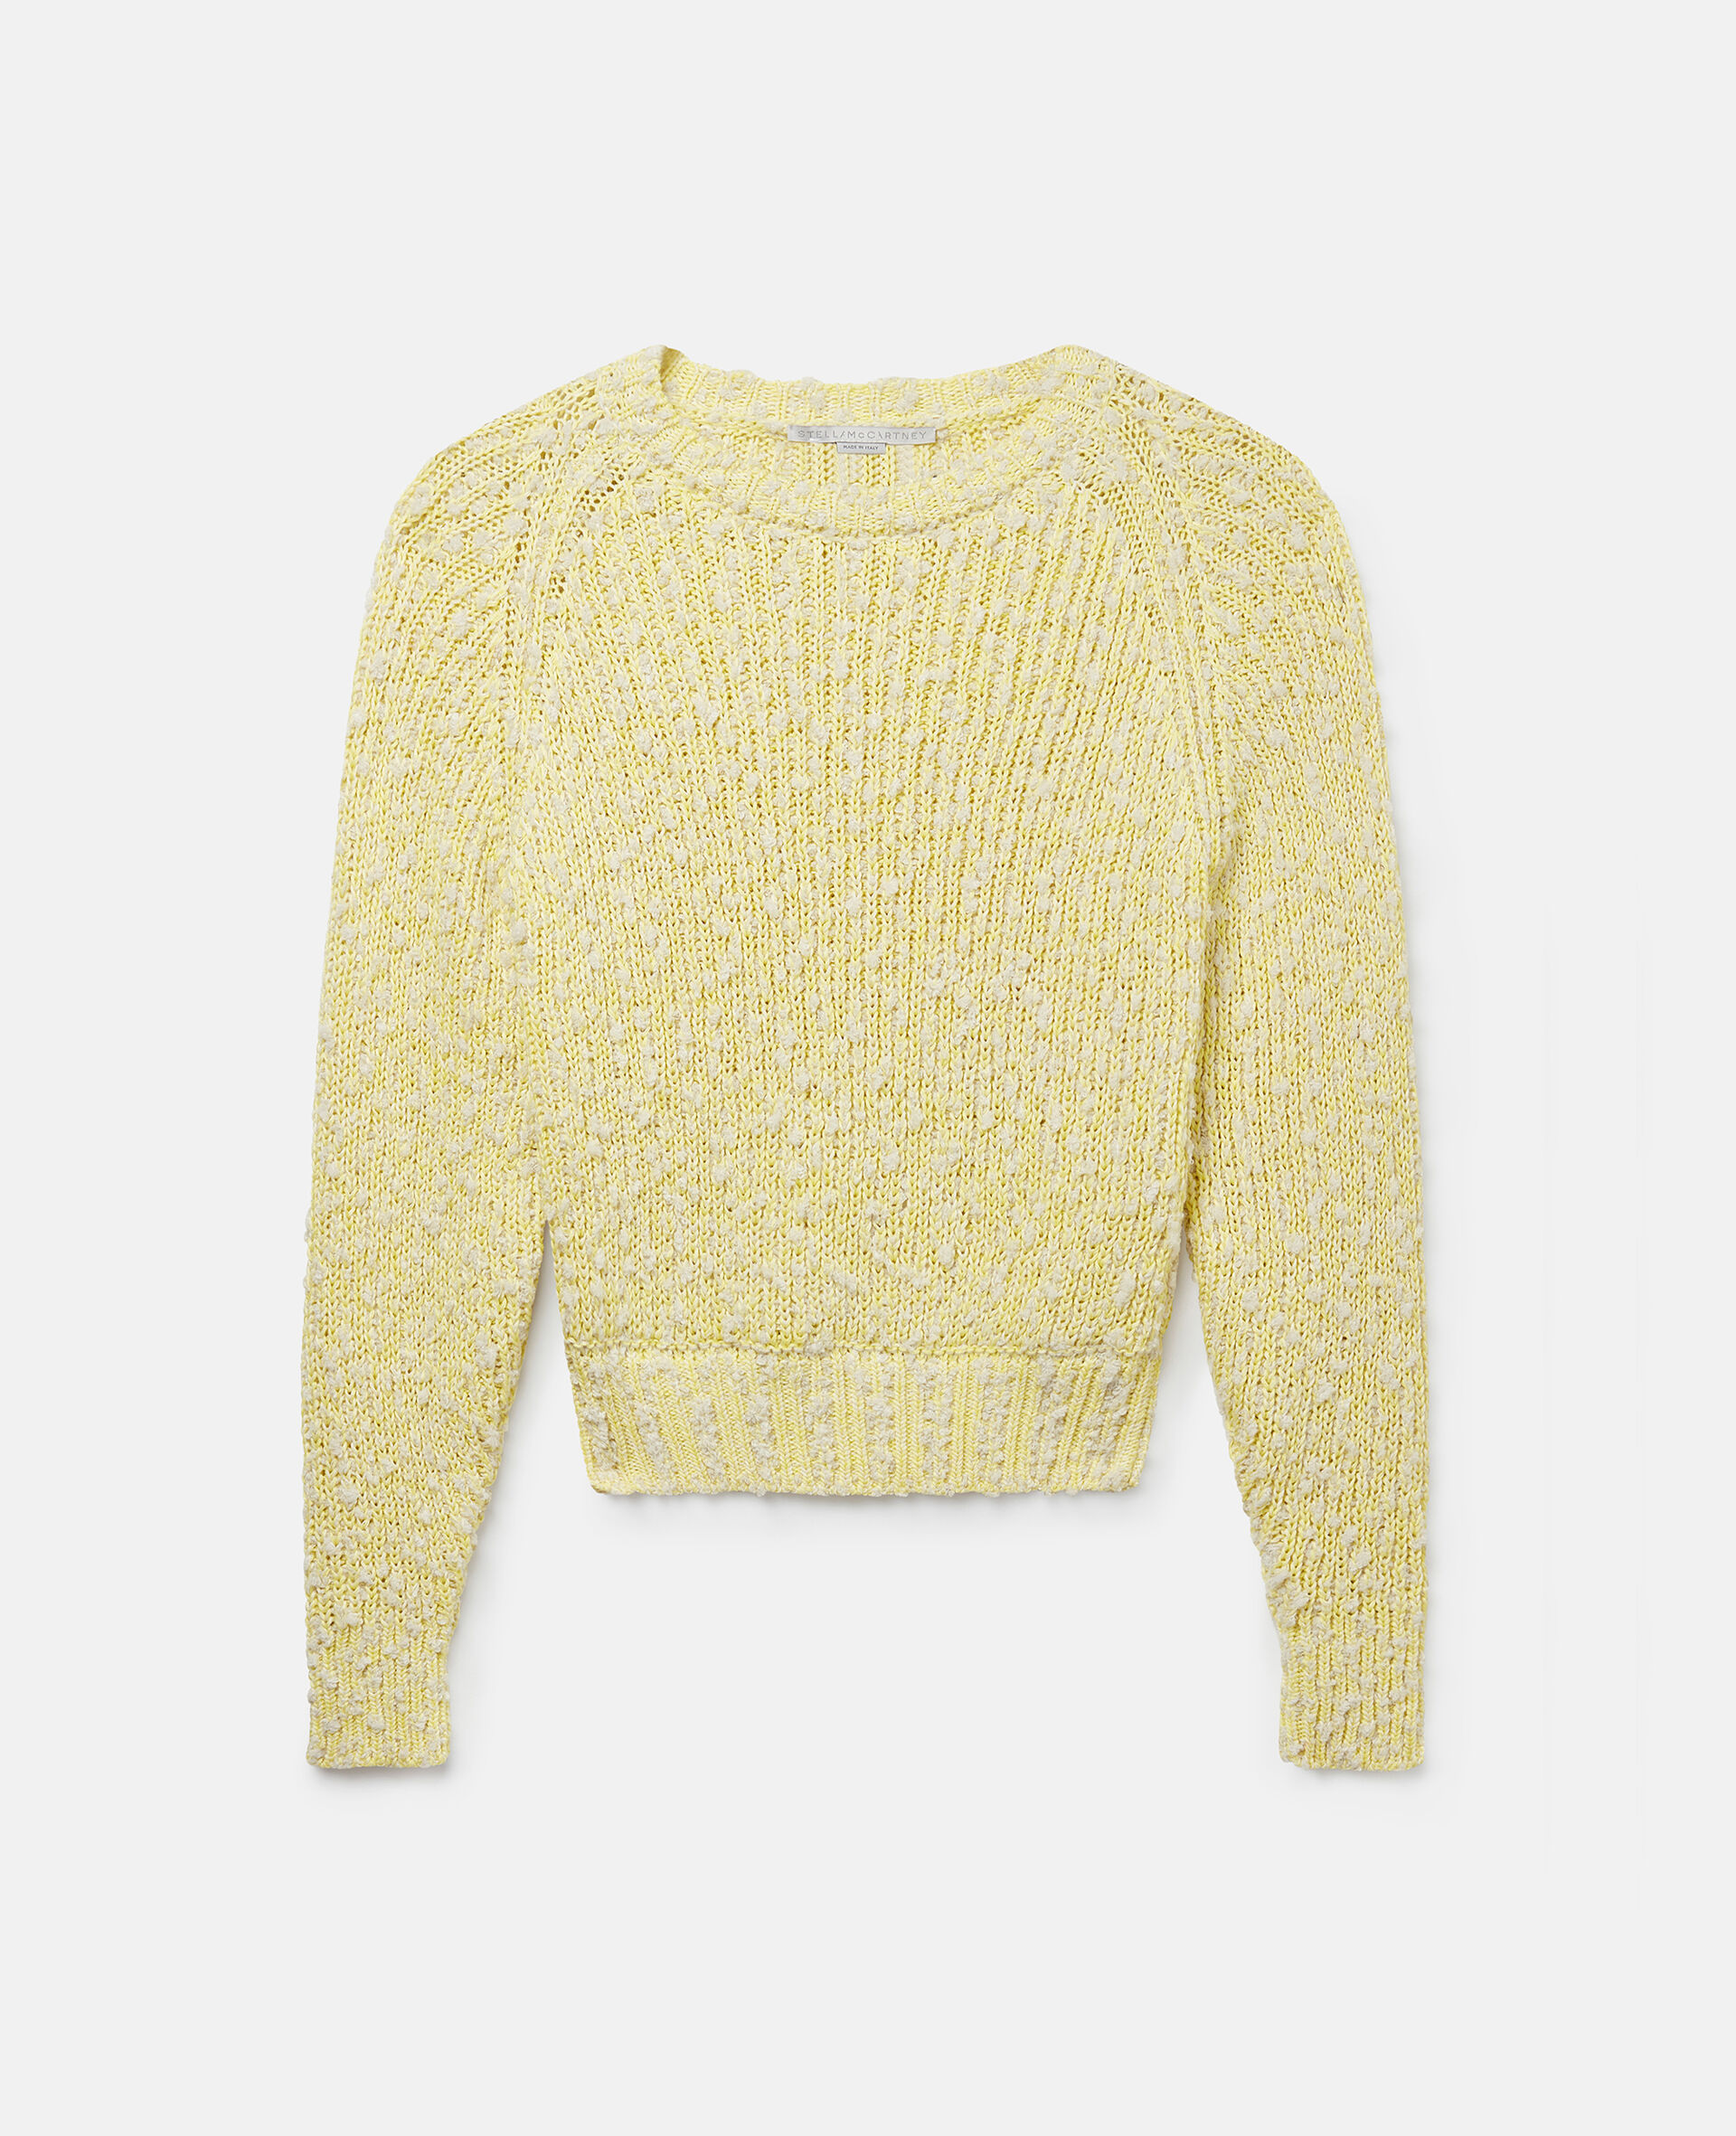 Textured Cotton Knit Crewneck Jumper-Yellow-large image number 0